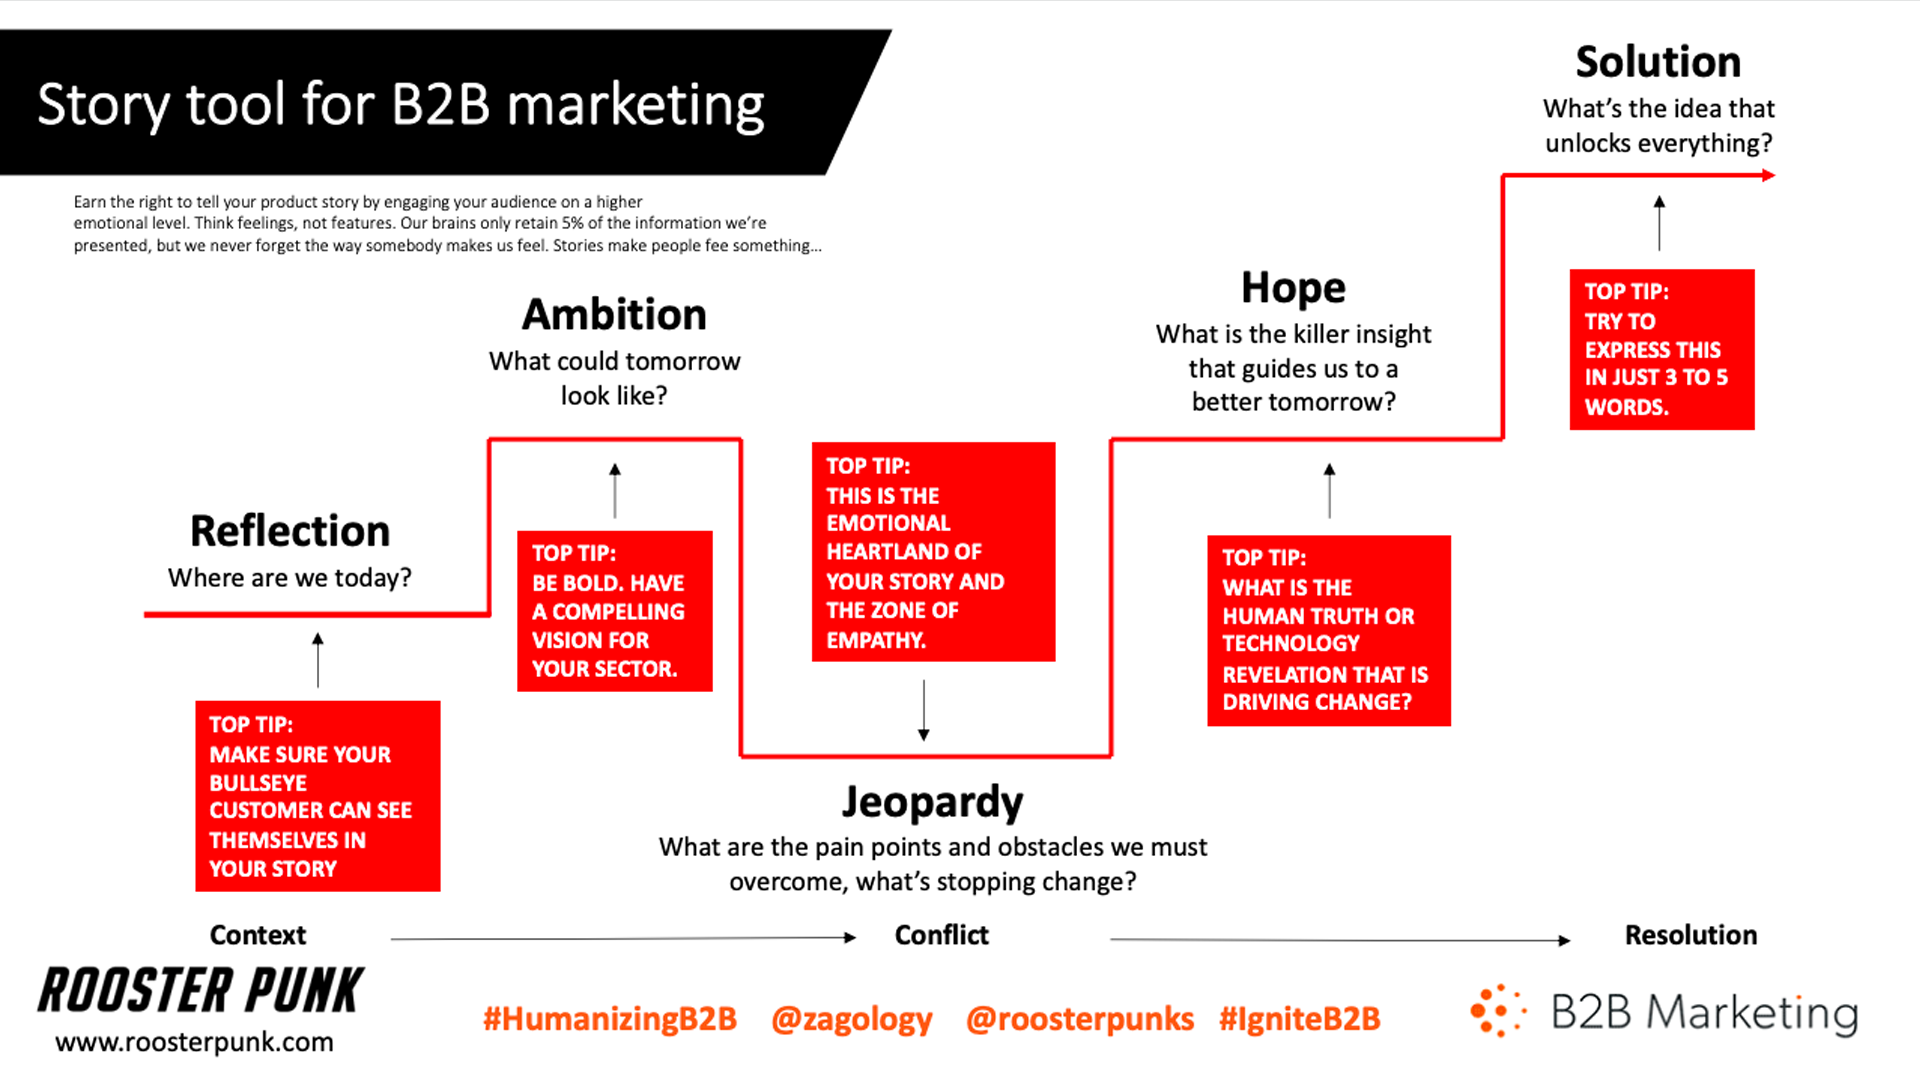 Rooster Punk slide - Story tool for B2B Marketing:
Reflection, Ambition, Jeopardy, Hope and Solution.